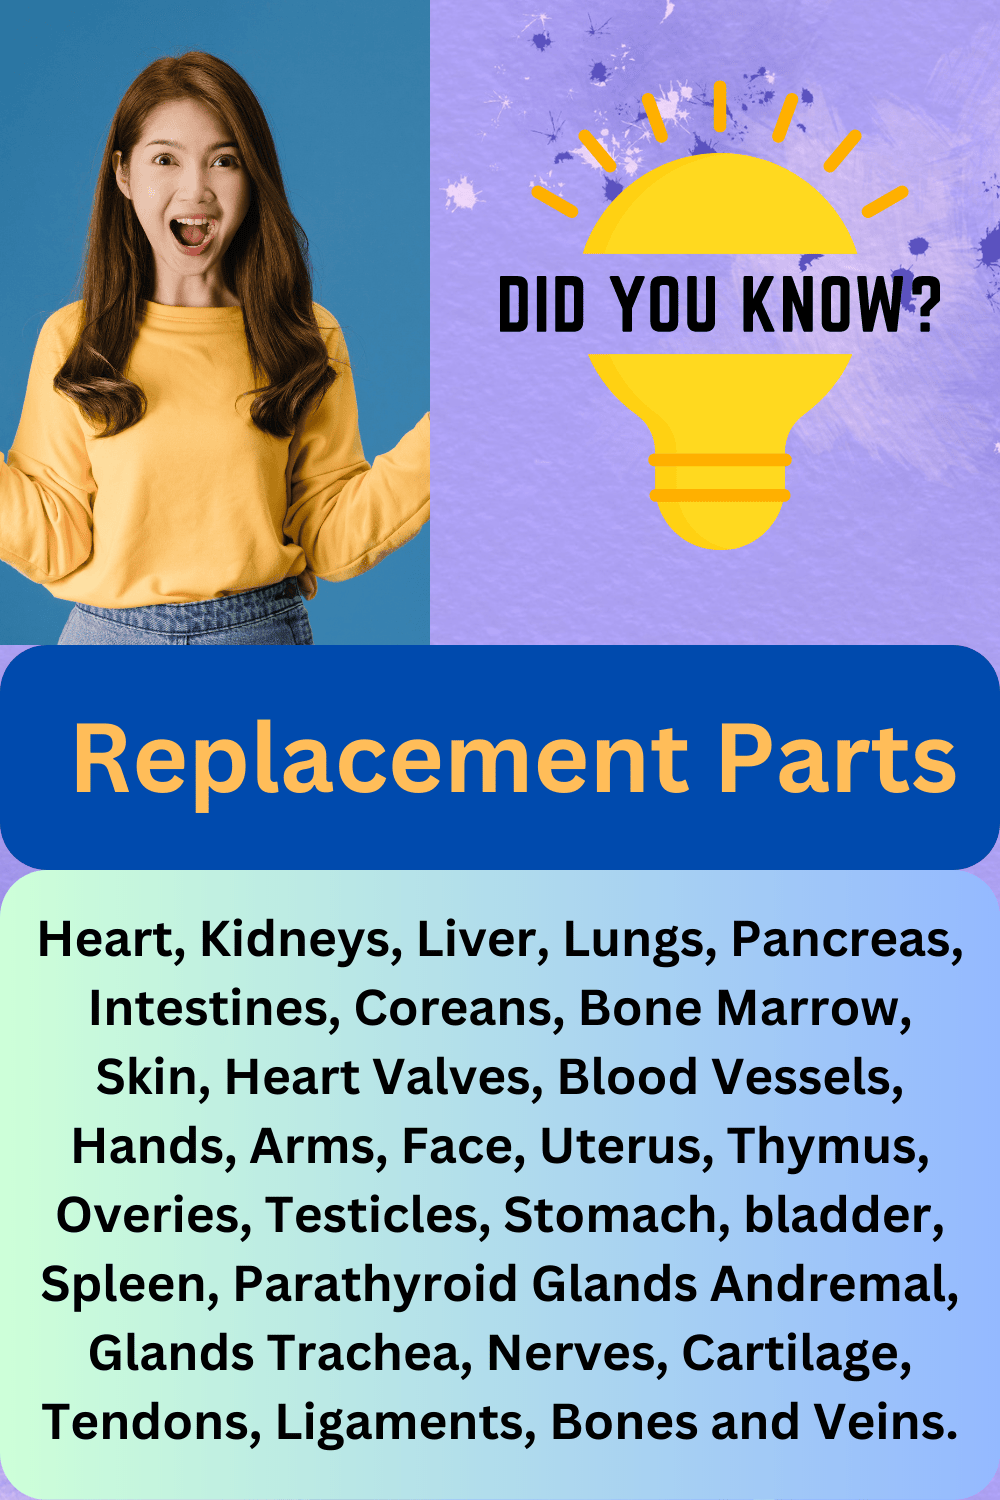 Organs that can be replaced